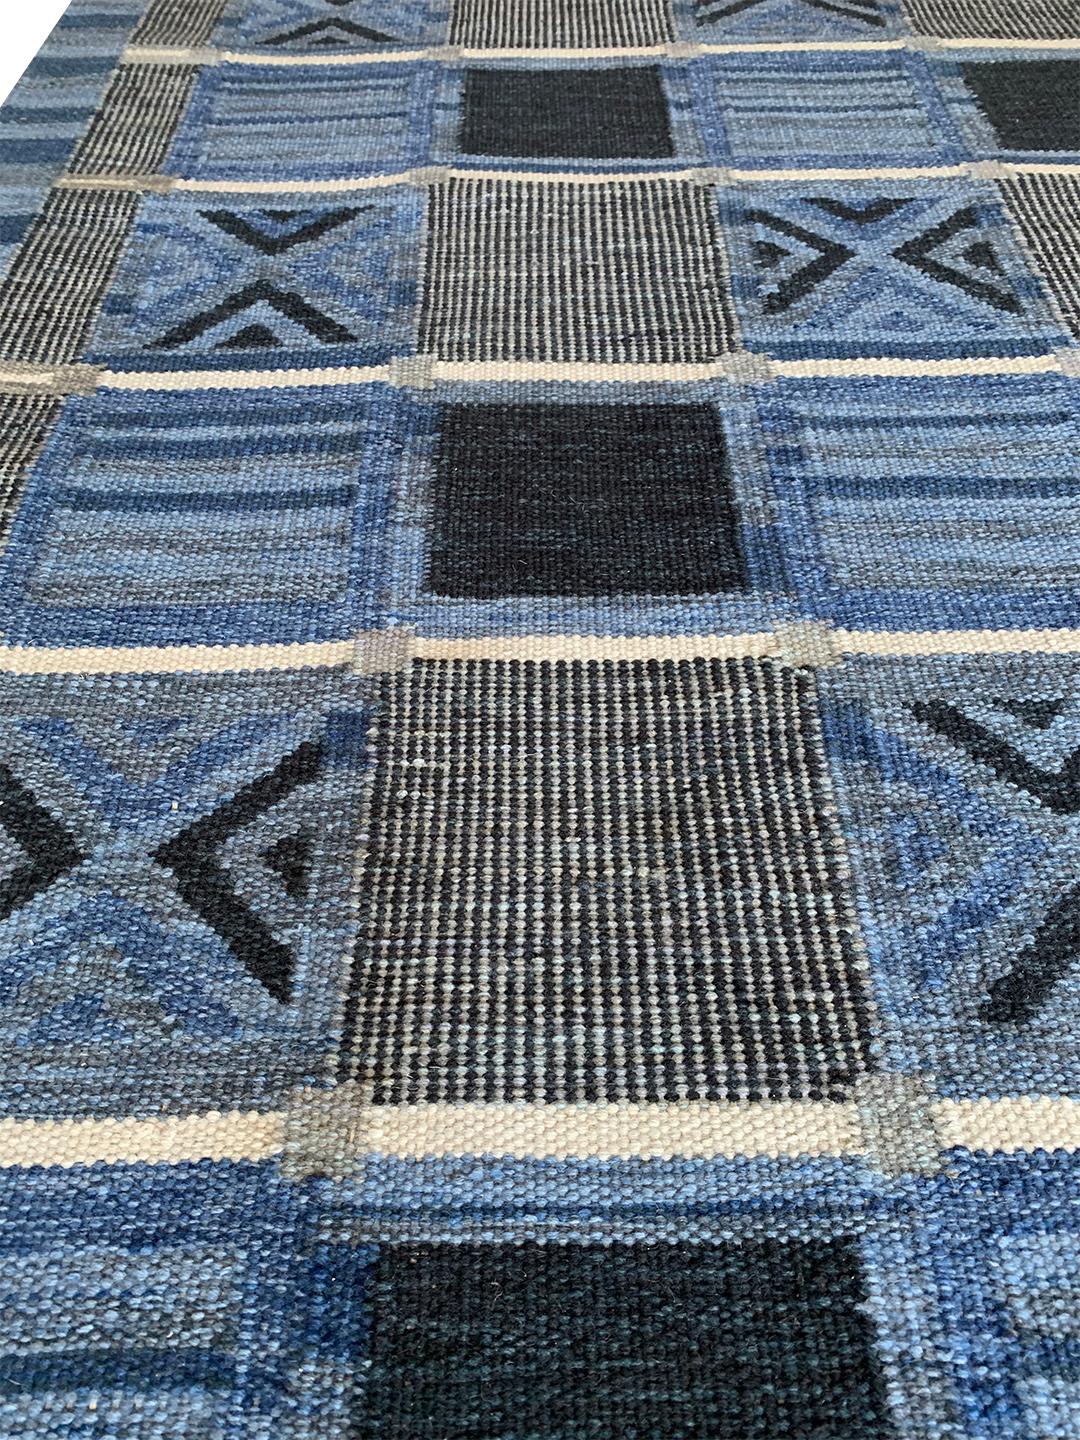 Swedish Style Flat-Weave Rug In New Condition For Sale In West Hollywood, CA